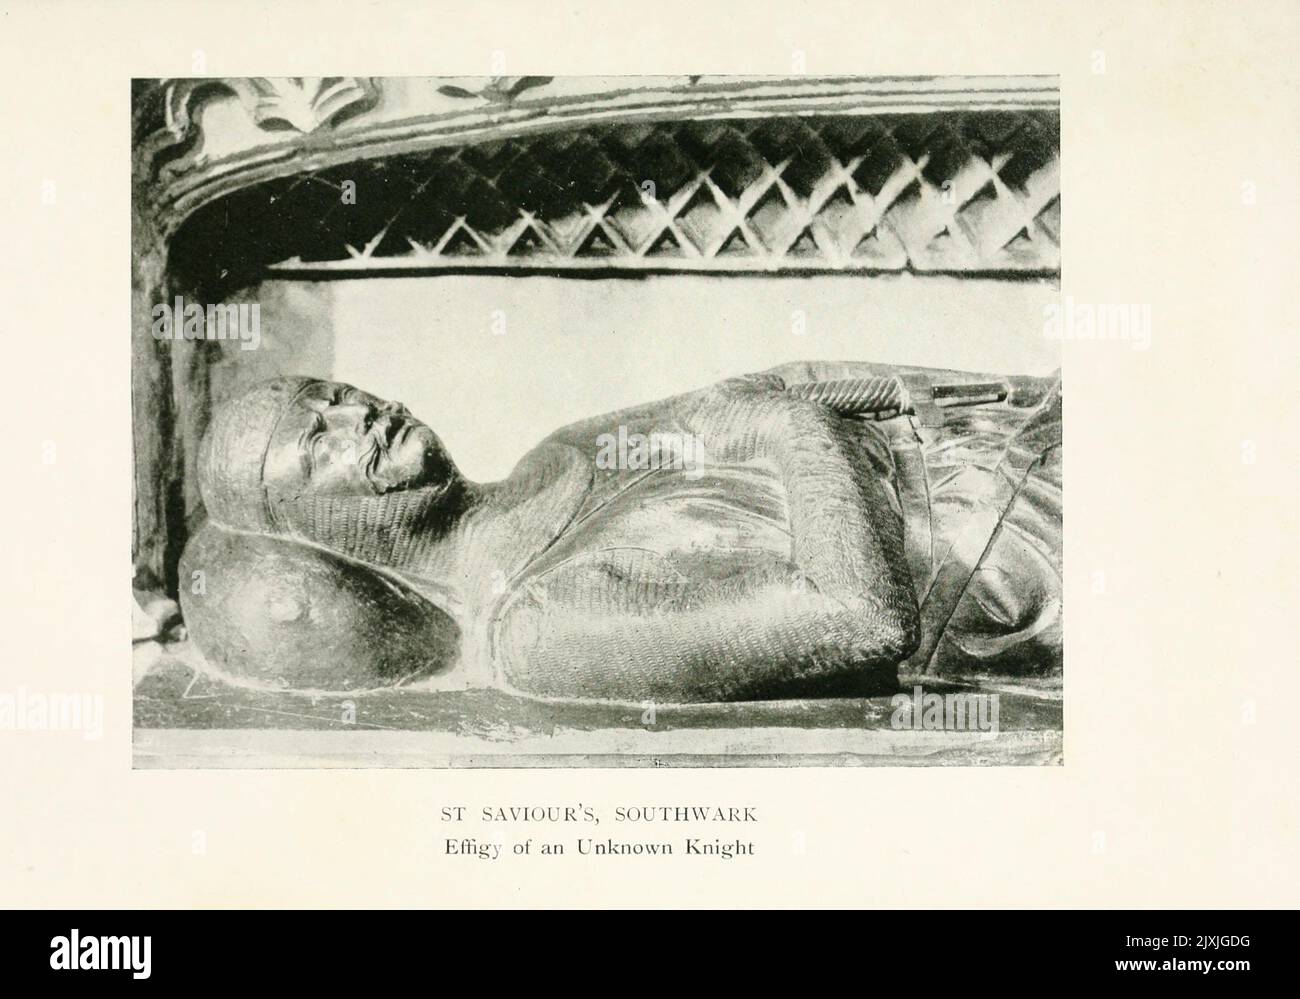 St Saviour's, Southwark — Effigy of an Unknown Knight from the book ' An historical guide to London ' by Taylor, George Robert Stirling Publication date 1911 Publisher London : J. M. Dent & sons, ltd.; New York, E. P. Dutton & co. Stock Photo